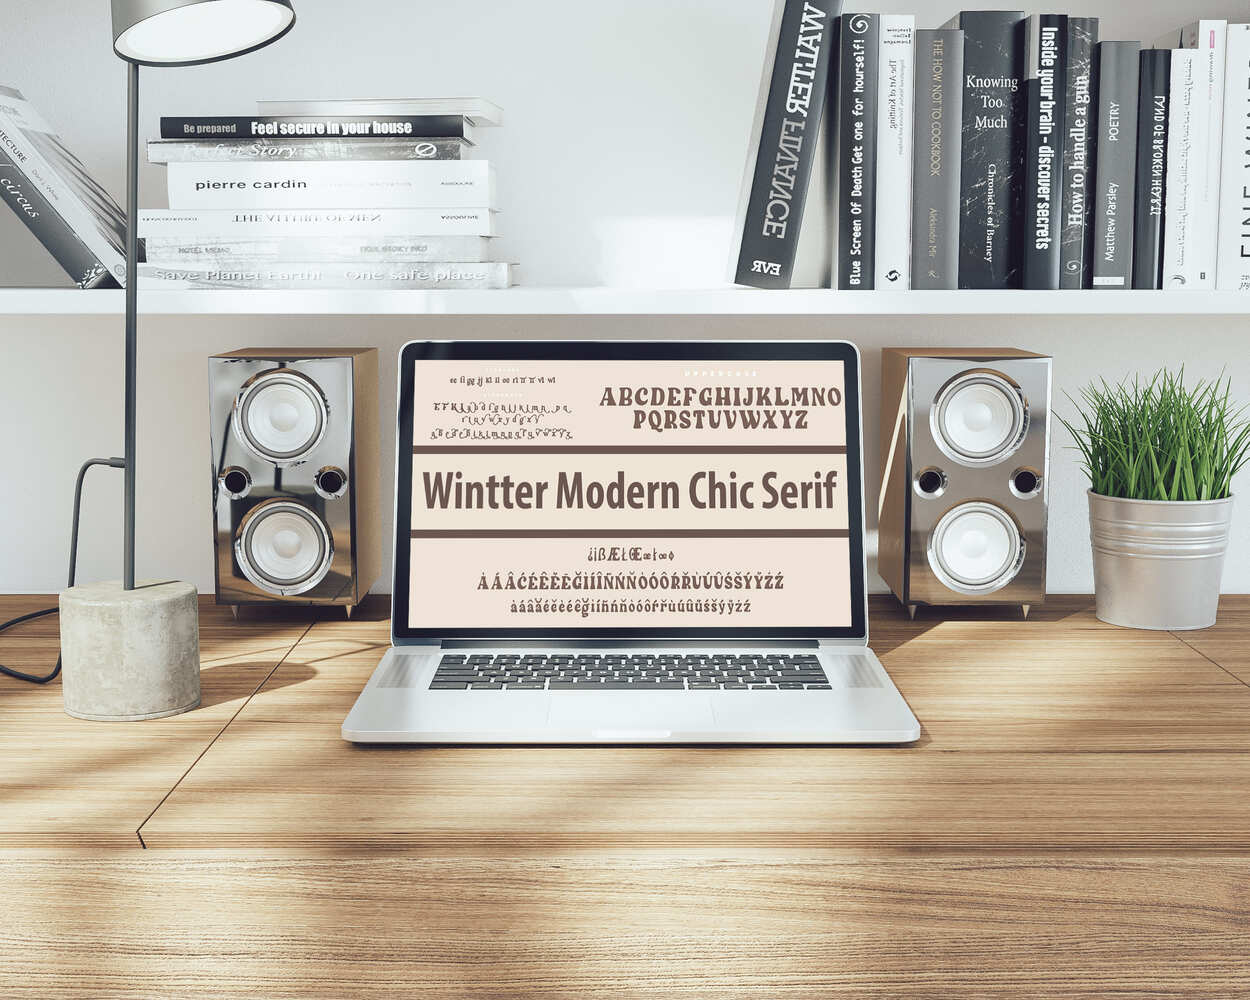 Wintter Modern Chic Serif Symbols Preview On The Laptop.